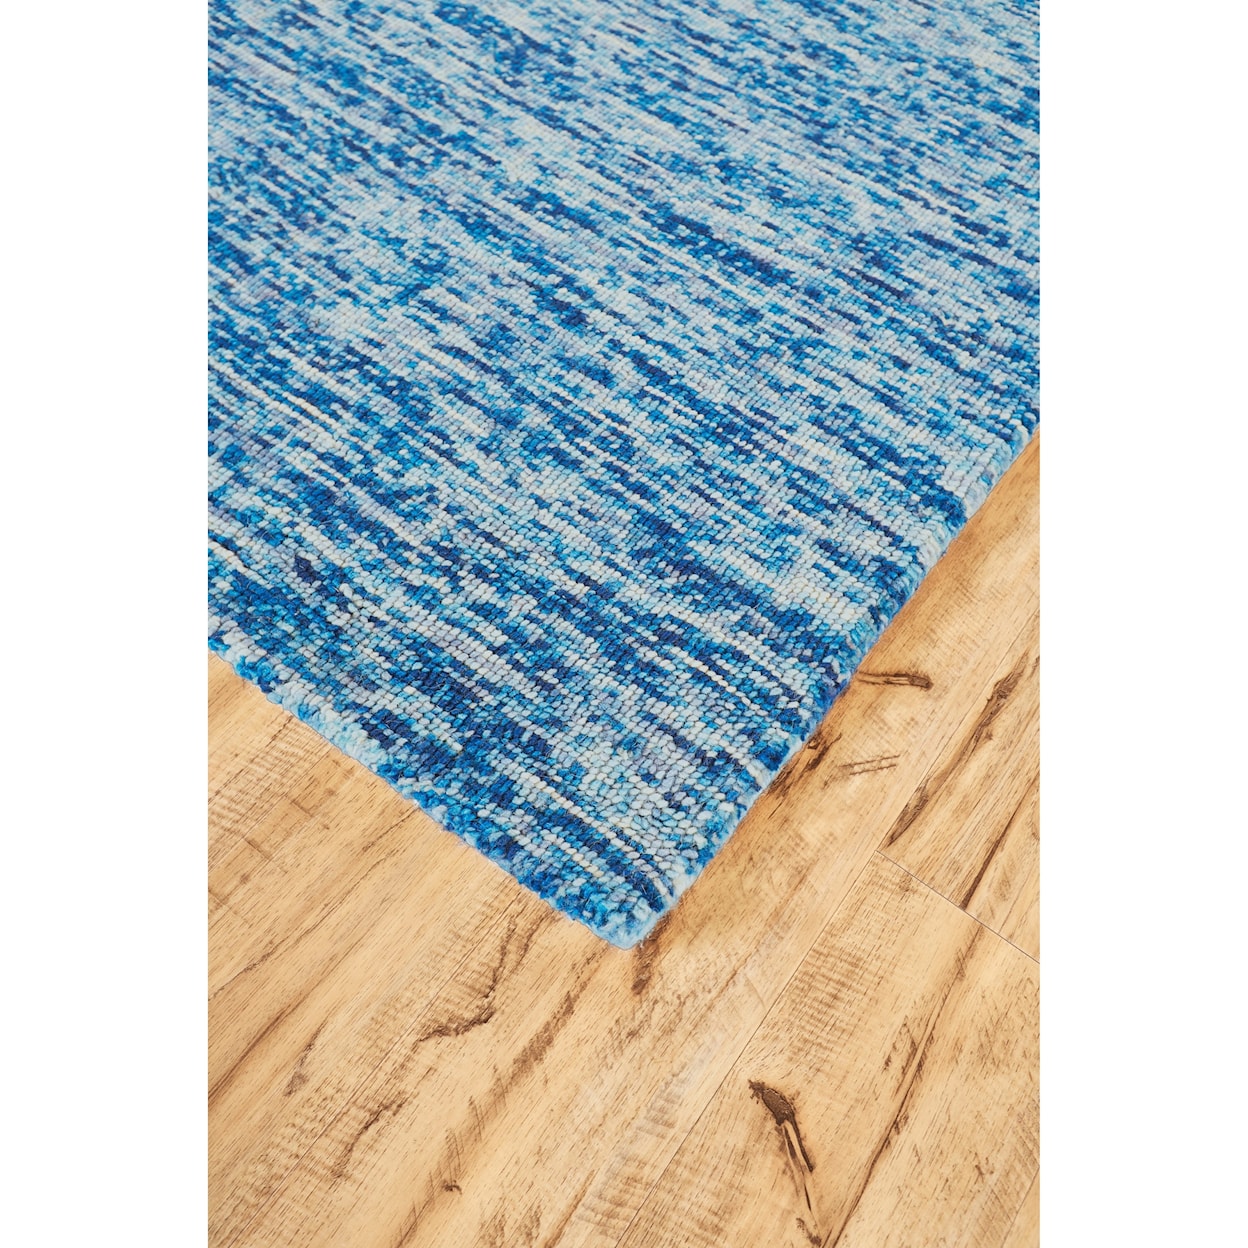 Feizy Rugs Cora Azure 2' x 3' Area Rug